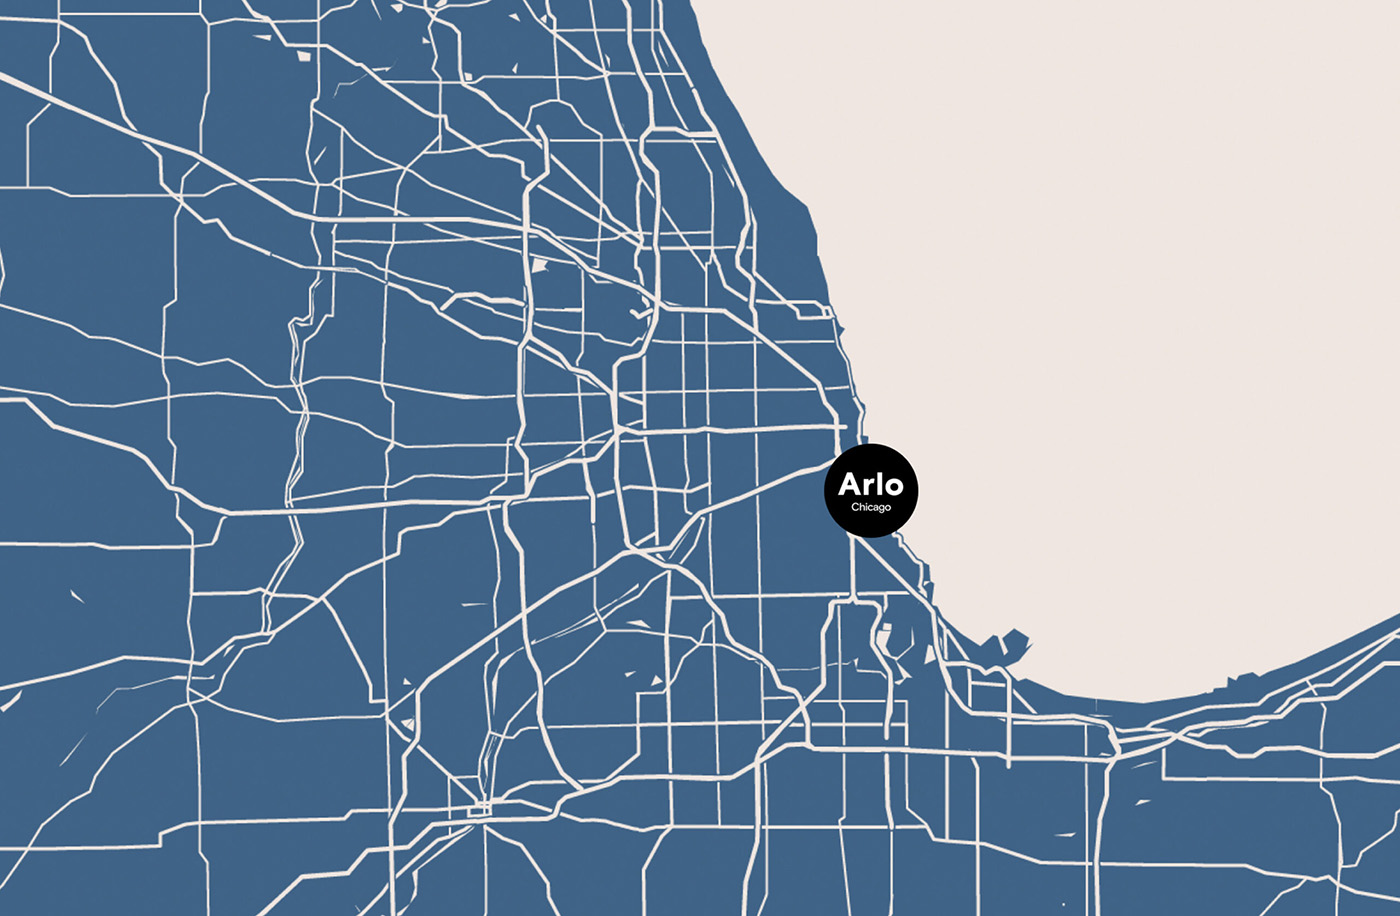 Map highlighting the location of "Arlo" in Chicago, with a simplistic blue and white design showing surrounding streets and water bodies.